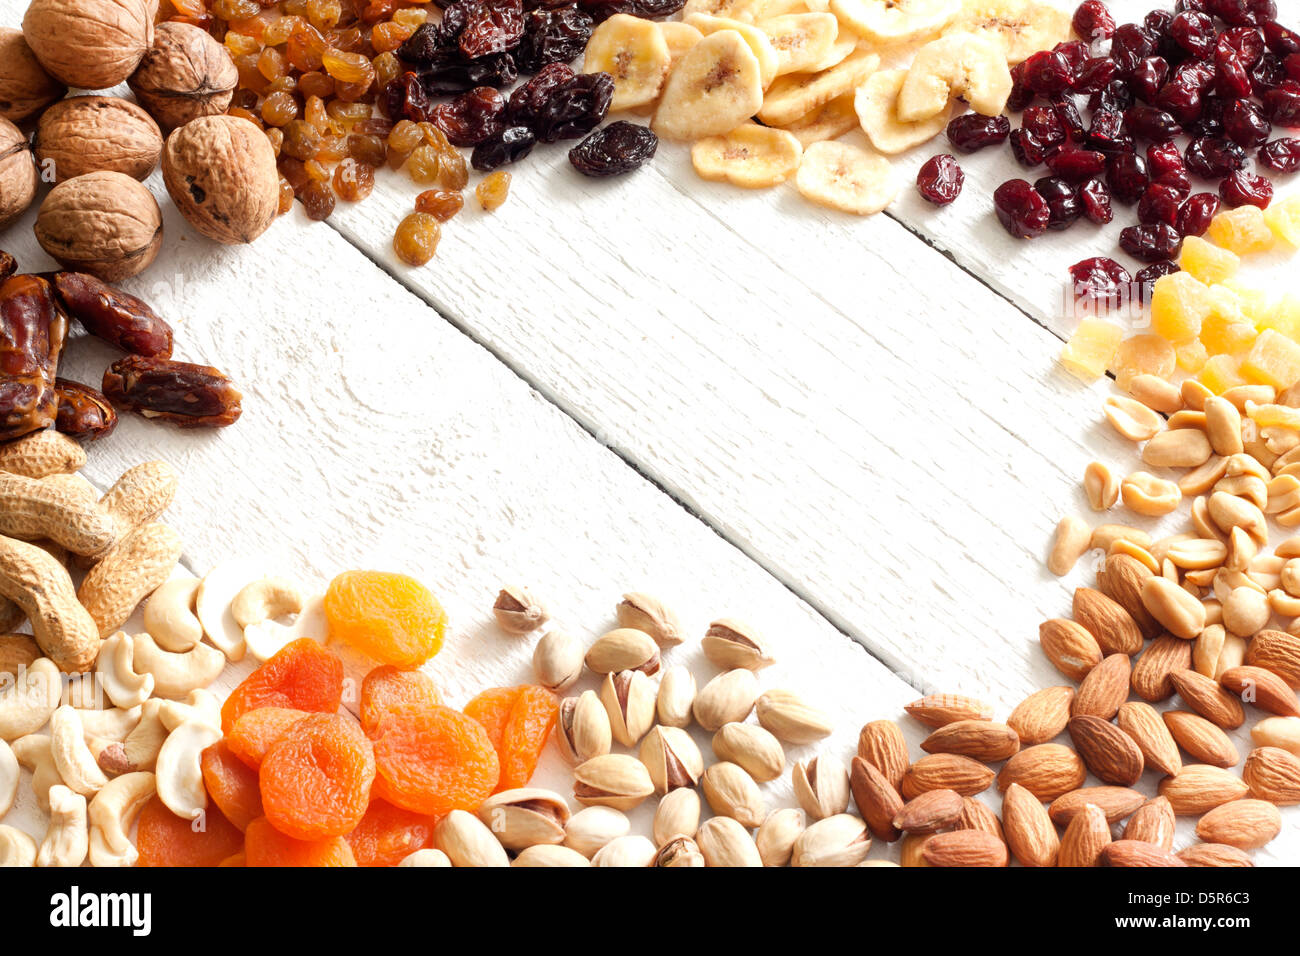 Dainty nuts and dried fruits mix Stock Photo